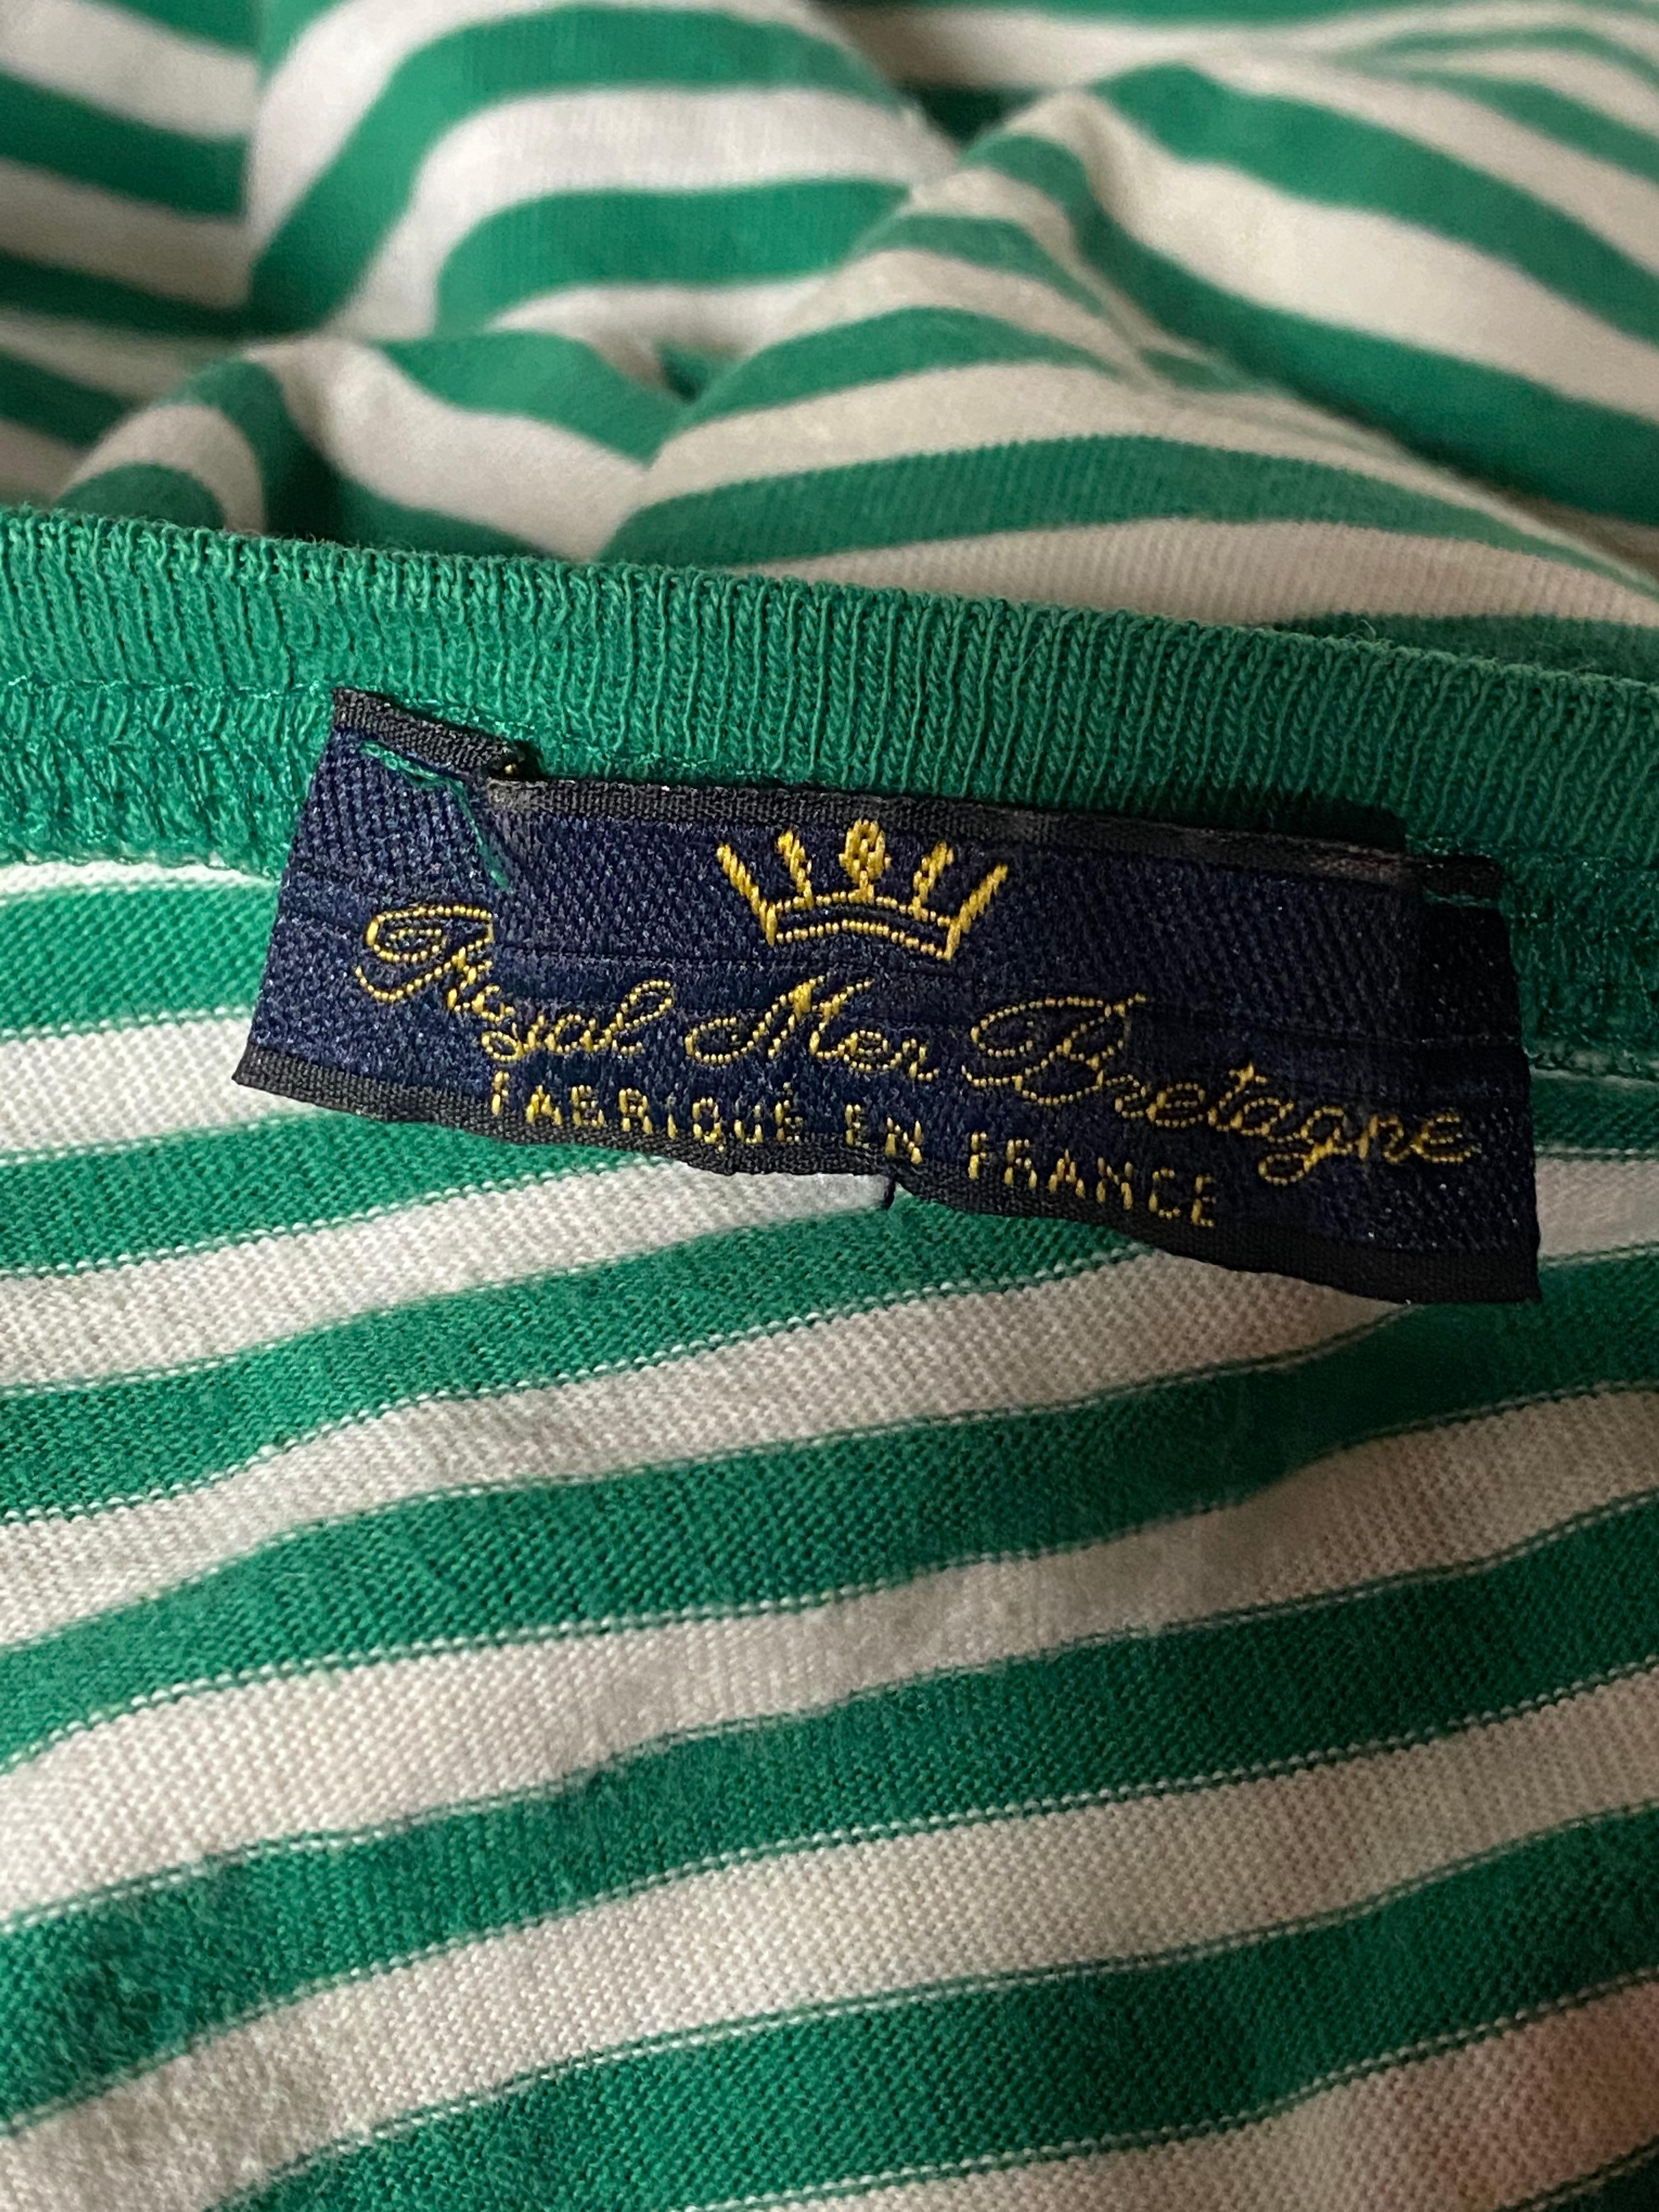 Royal Mer Bretange White and Green Striped T- Shirt, Size 46 In Good Condition For Sale In Beverly Hills, CA